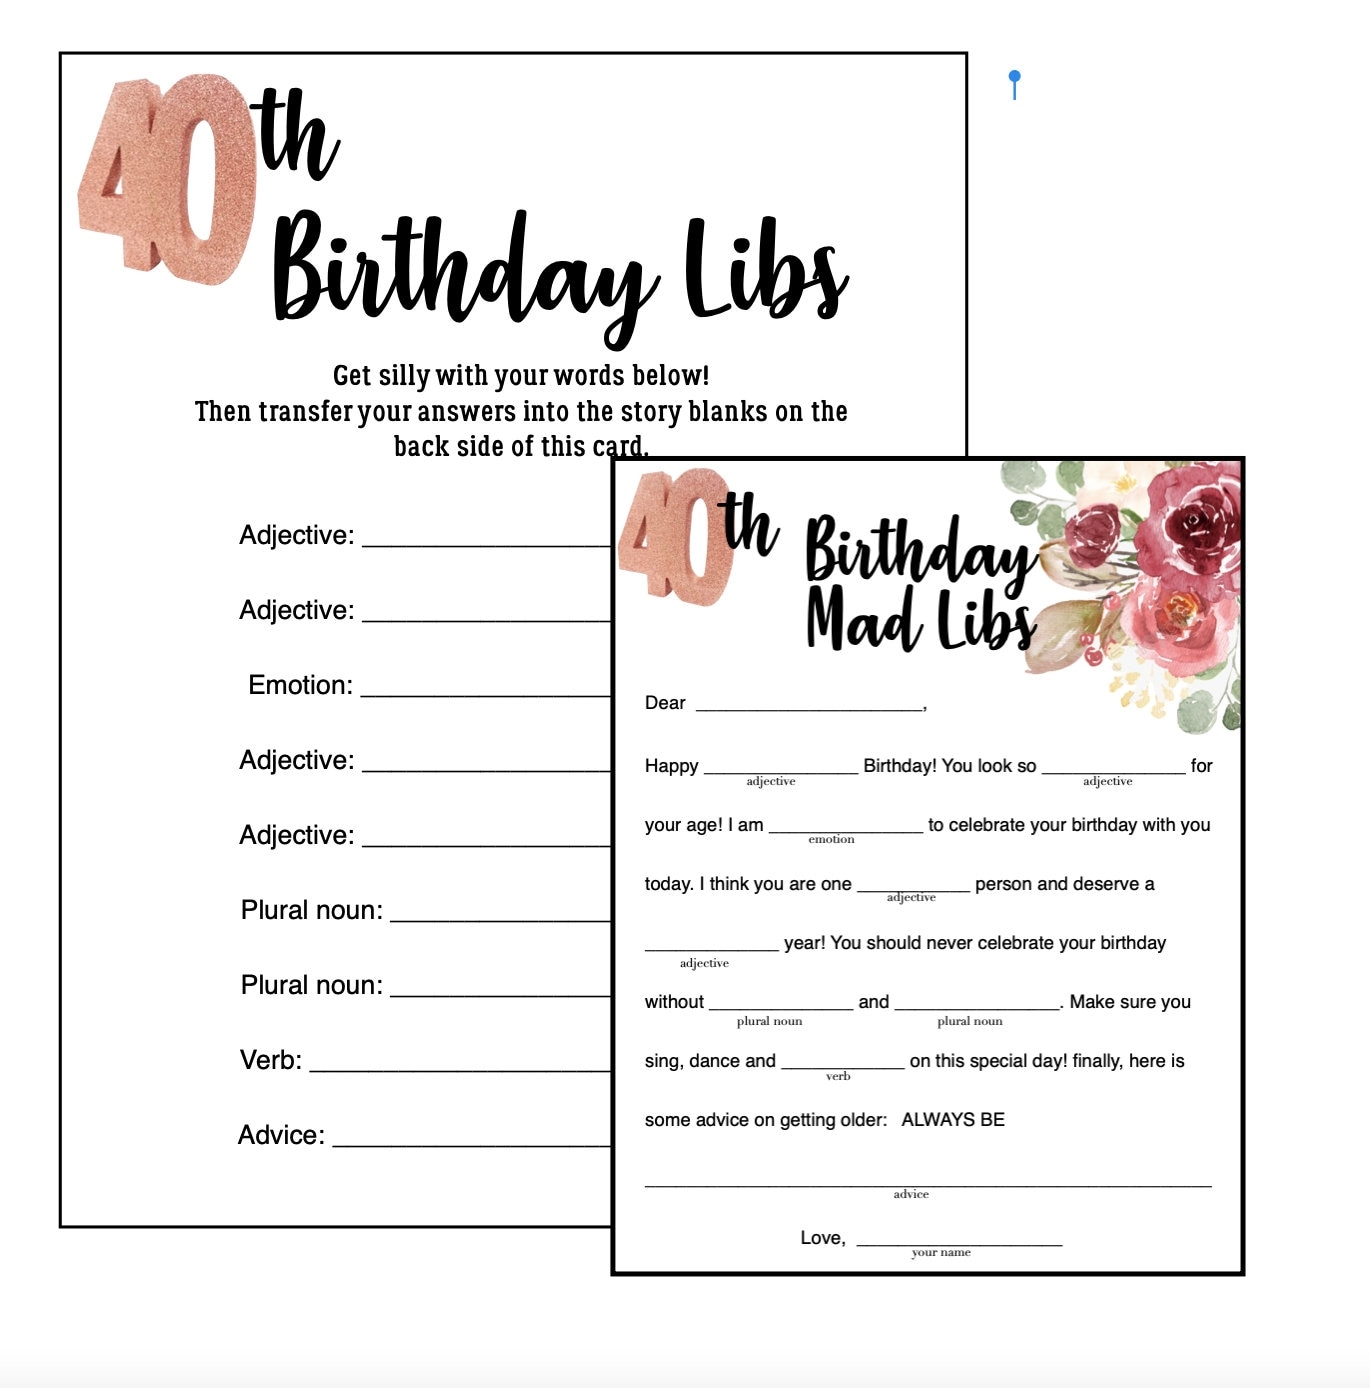 Birthday Party Activities Mad Libs instant Download Birthday Party Ideas Birthday DIY Birthday Libs Etsy